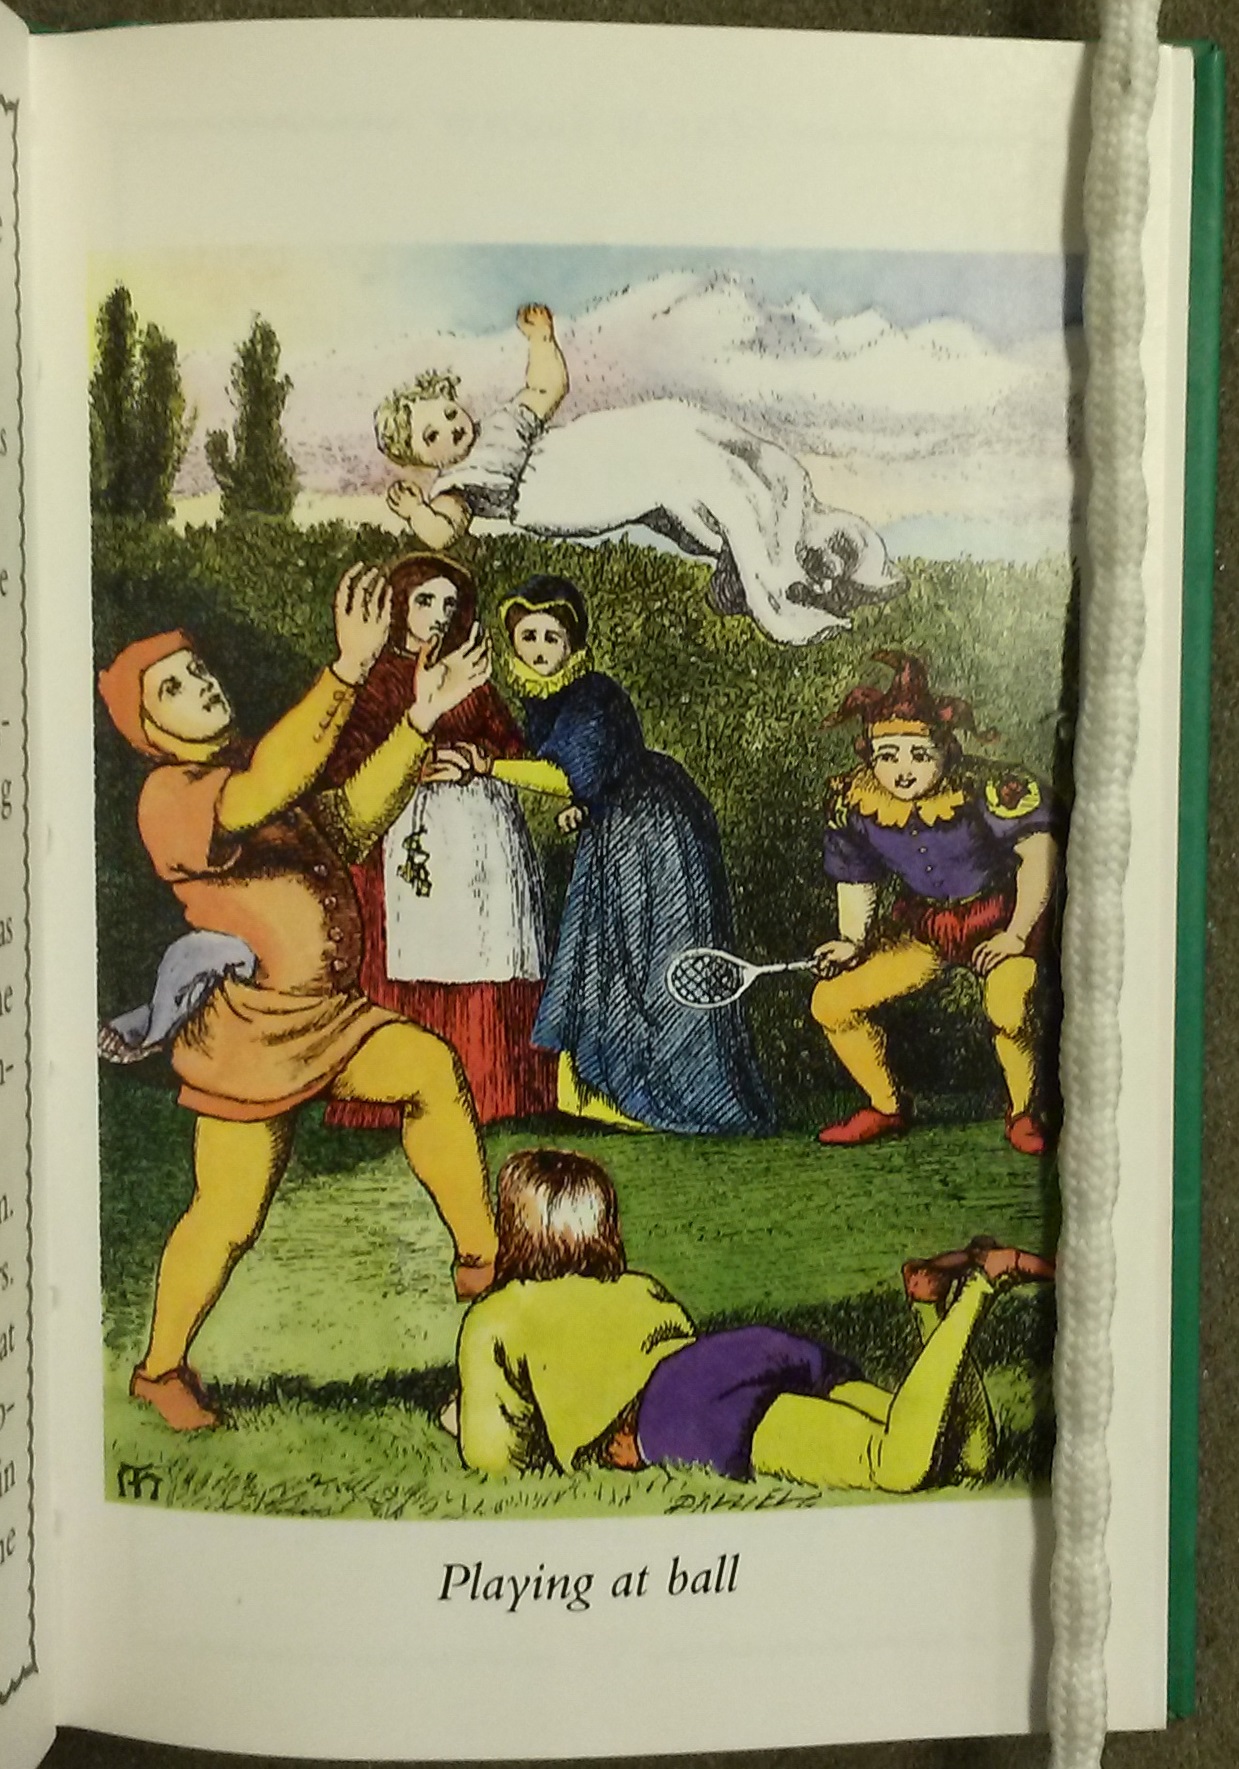 Illustration of the servants playing ball with the princess as the ball. 